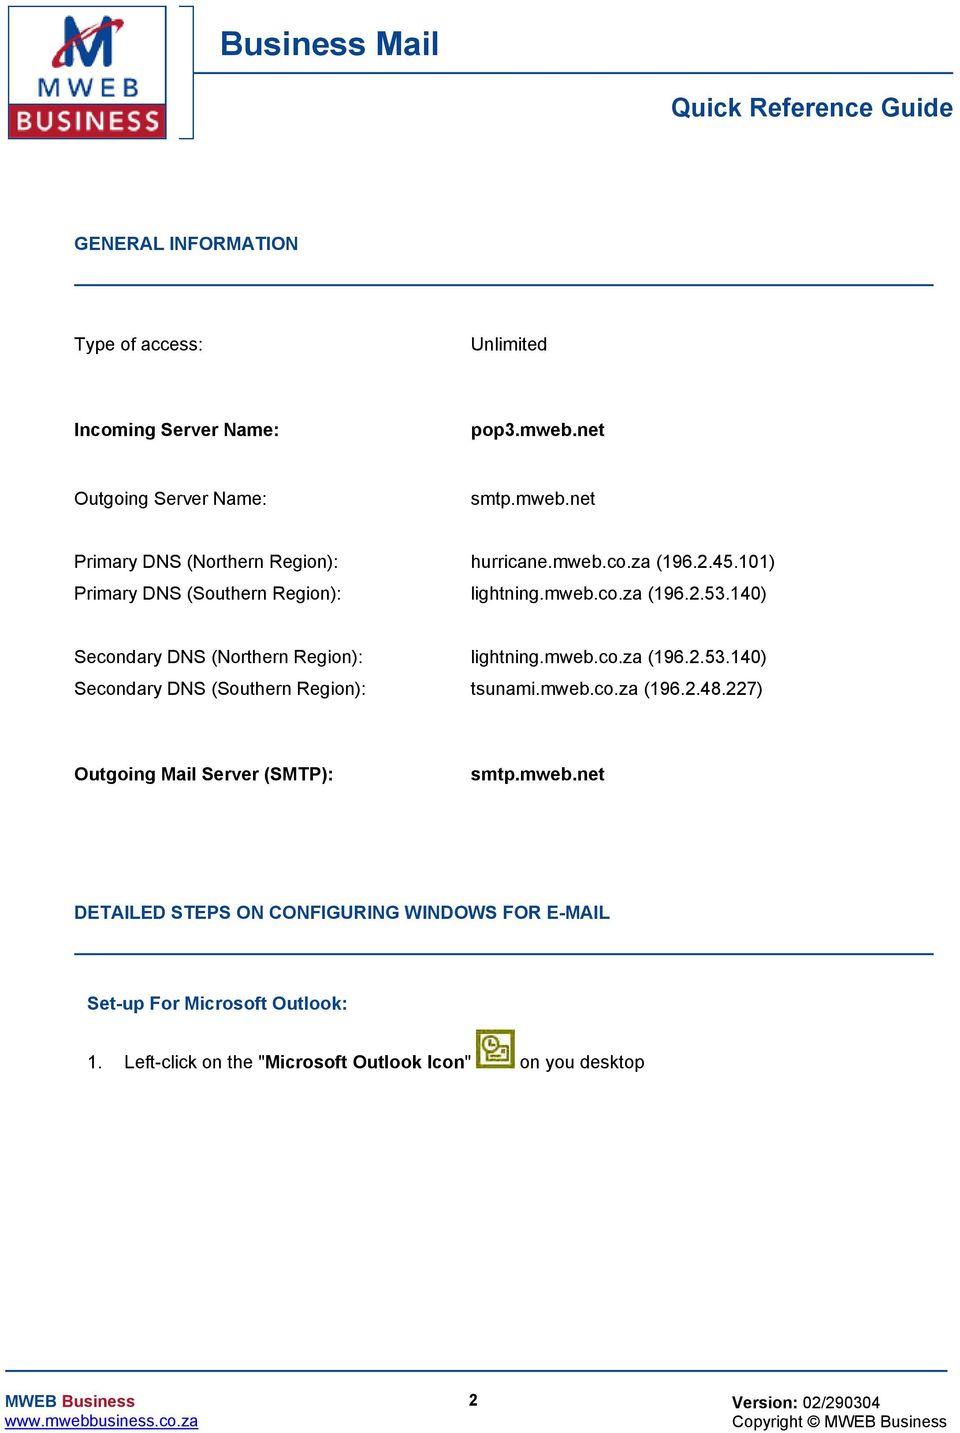 mweb.co.za (196.2.48.227) Outgoing Mail Server (SMTP): smtp.mweb.net DETAILED STEPS ON CONFIGURING WINDOWS FOR E-MAIL Set-up For Microsoft Outlook: 1.